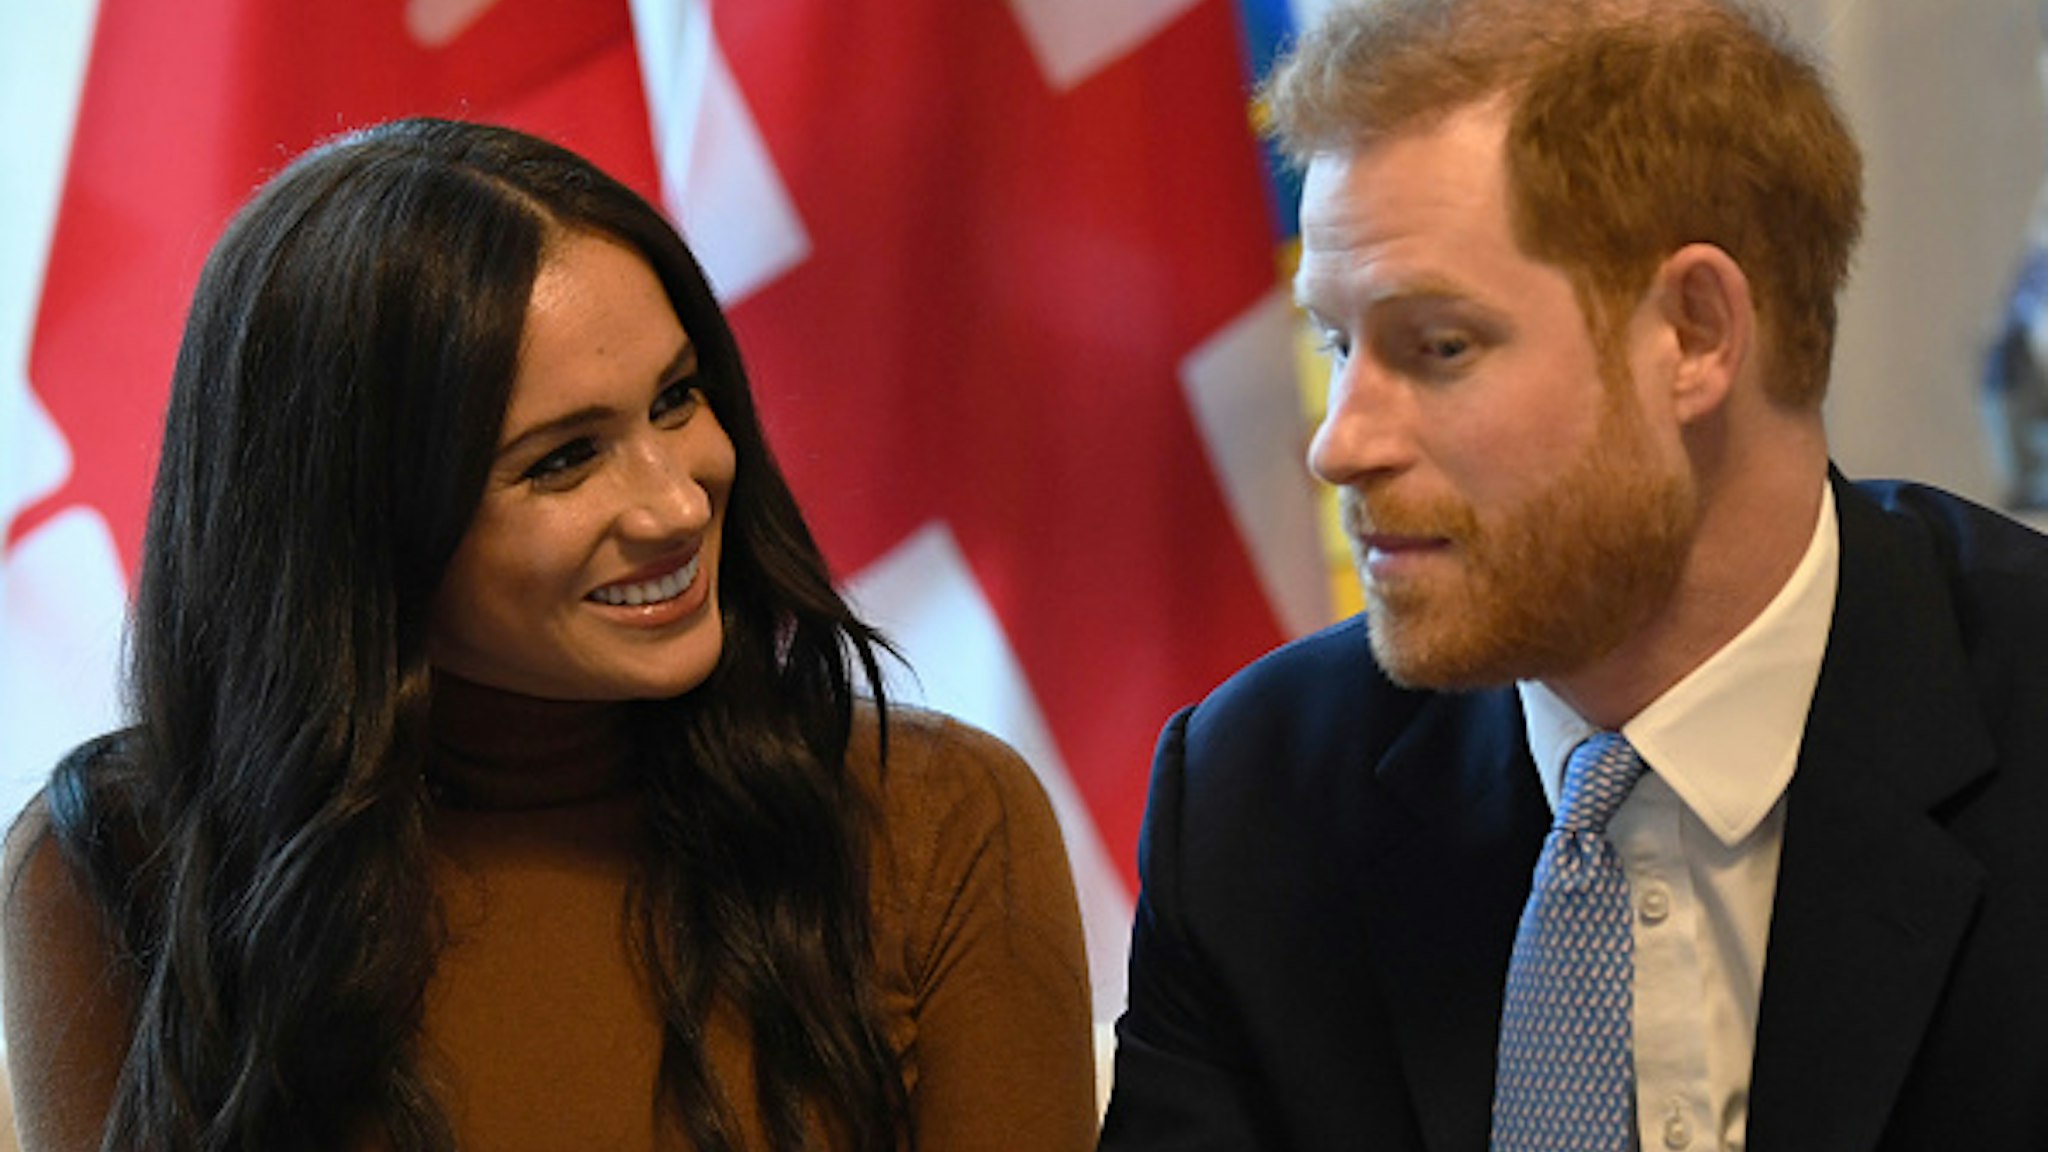 LONDON, UNITED KINGDOM - JANUARY 07: Prince Harry, Duke of Sussex and Meghan, Duchess of Sussex gesture during their visit to Canada House in thanks for the warm Canadian hospitality and support they received during their recent stay in Canada, on January 7, 2020 in London, England.